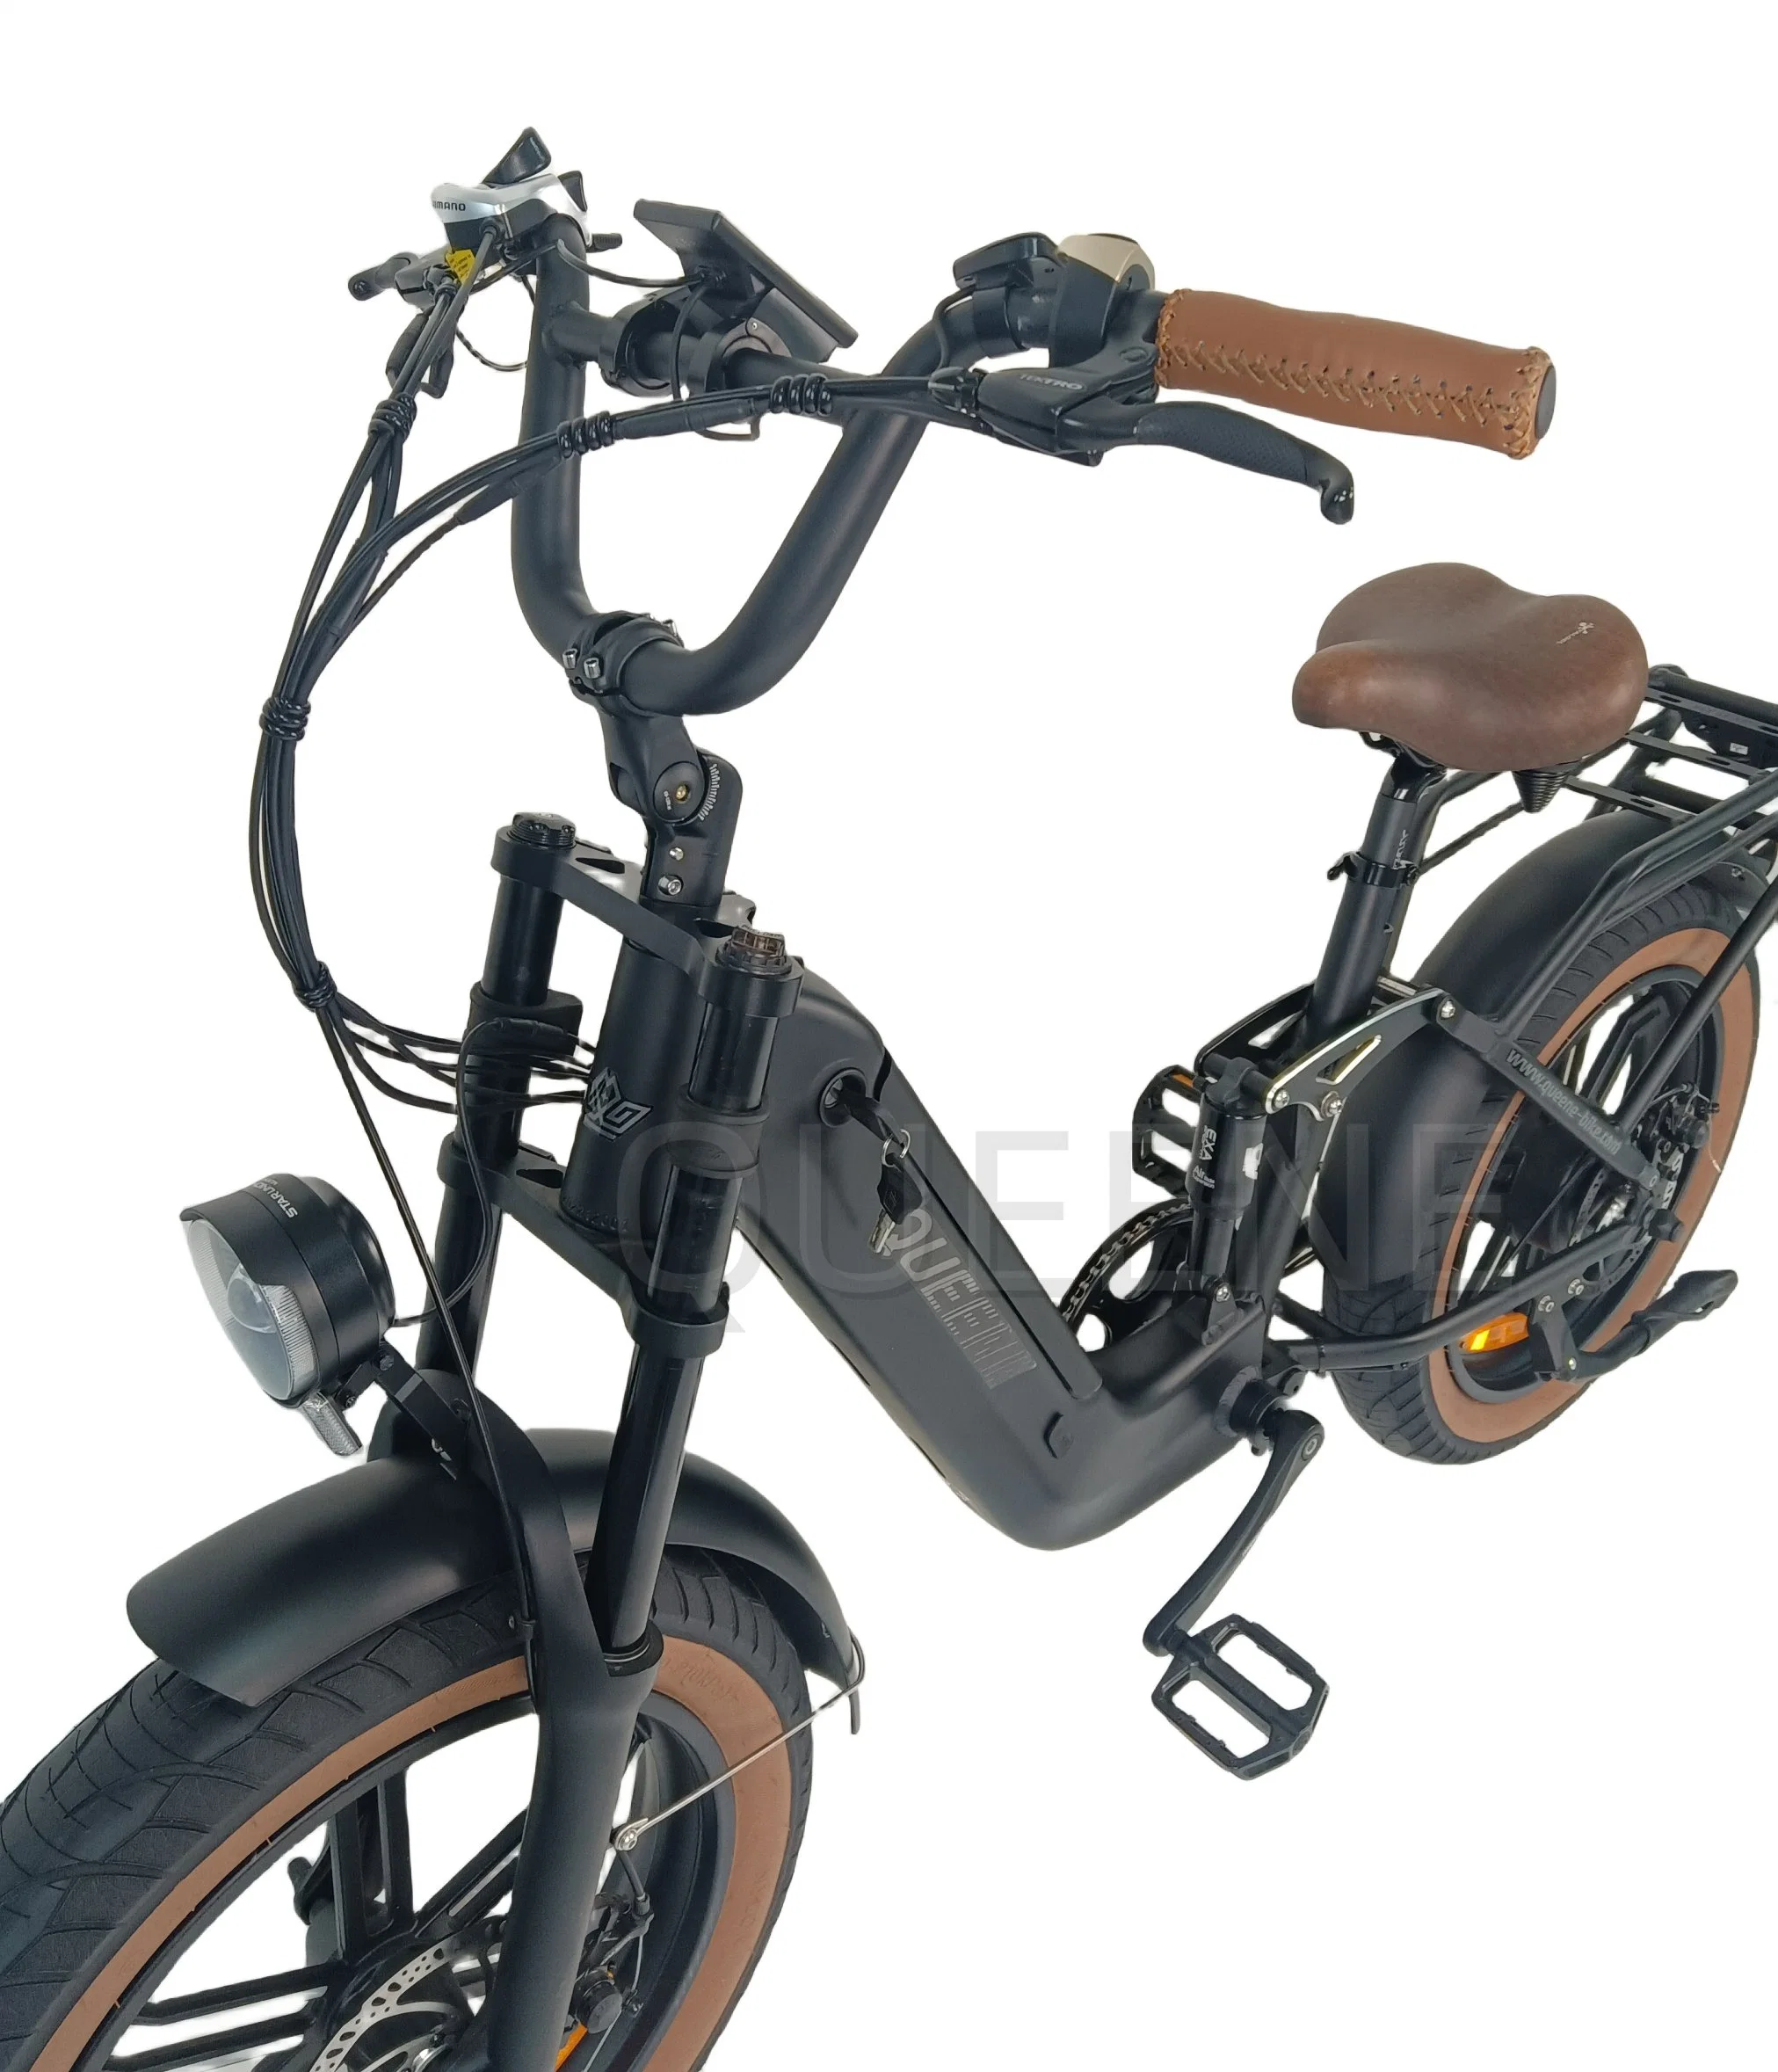 Queene New arrival 48V500W750W Commuting Electric Bike Powered Electric Vehicle Avec double suspension